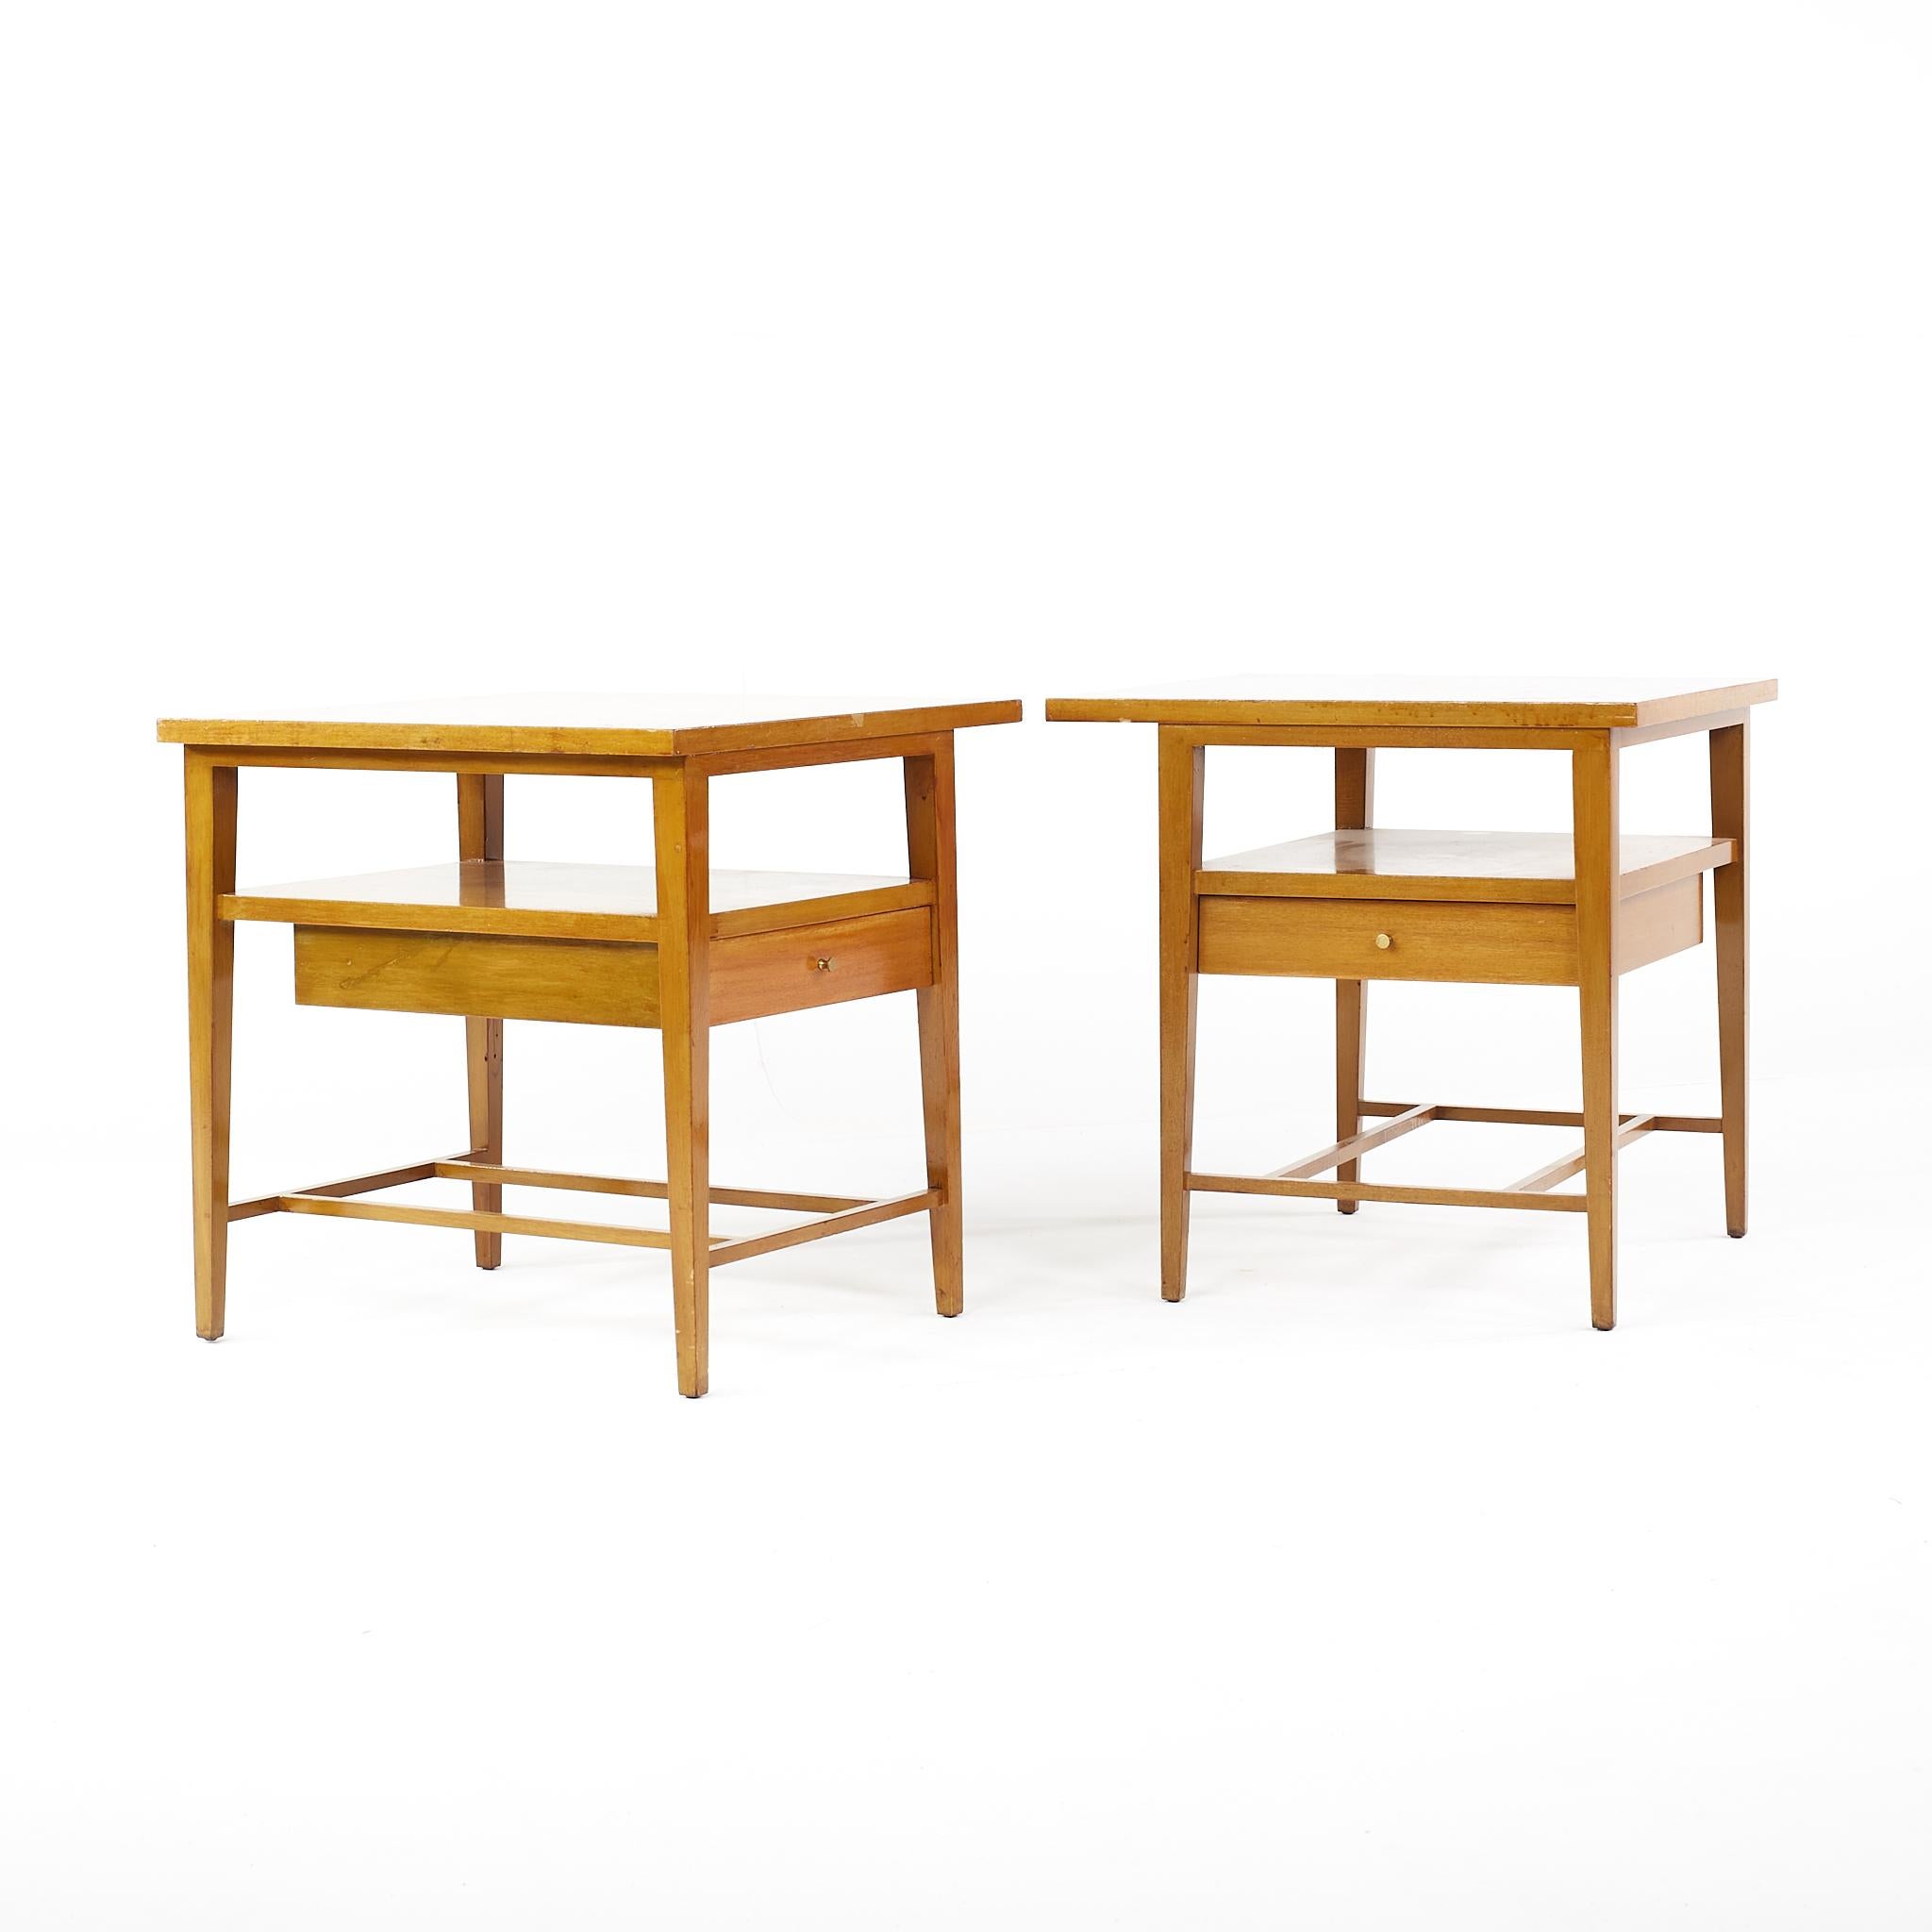 Paul McCobb for Calvin mid century maple end tables - Pair

Each end table measures: 22 wide x 22 deep x 22 inches high

All pieces of furniture can be had in what we call restored vintage condition. That means the piece is restored upon